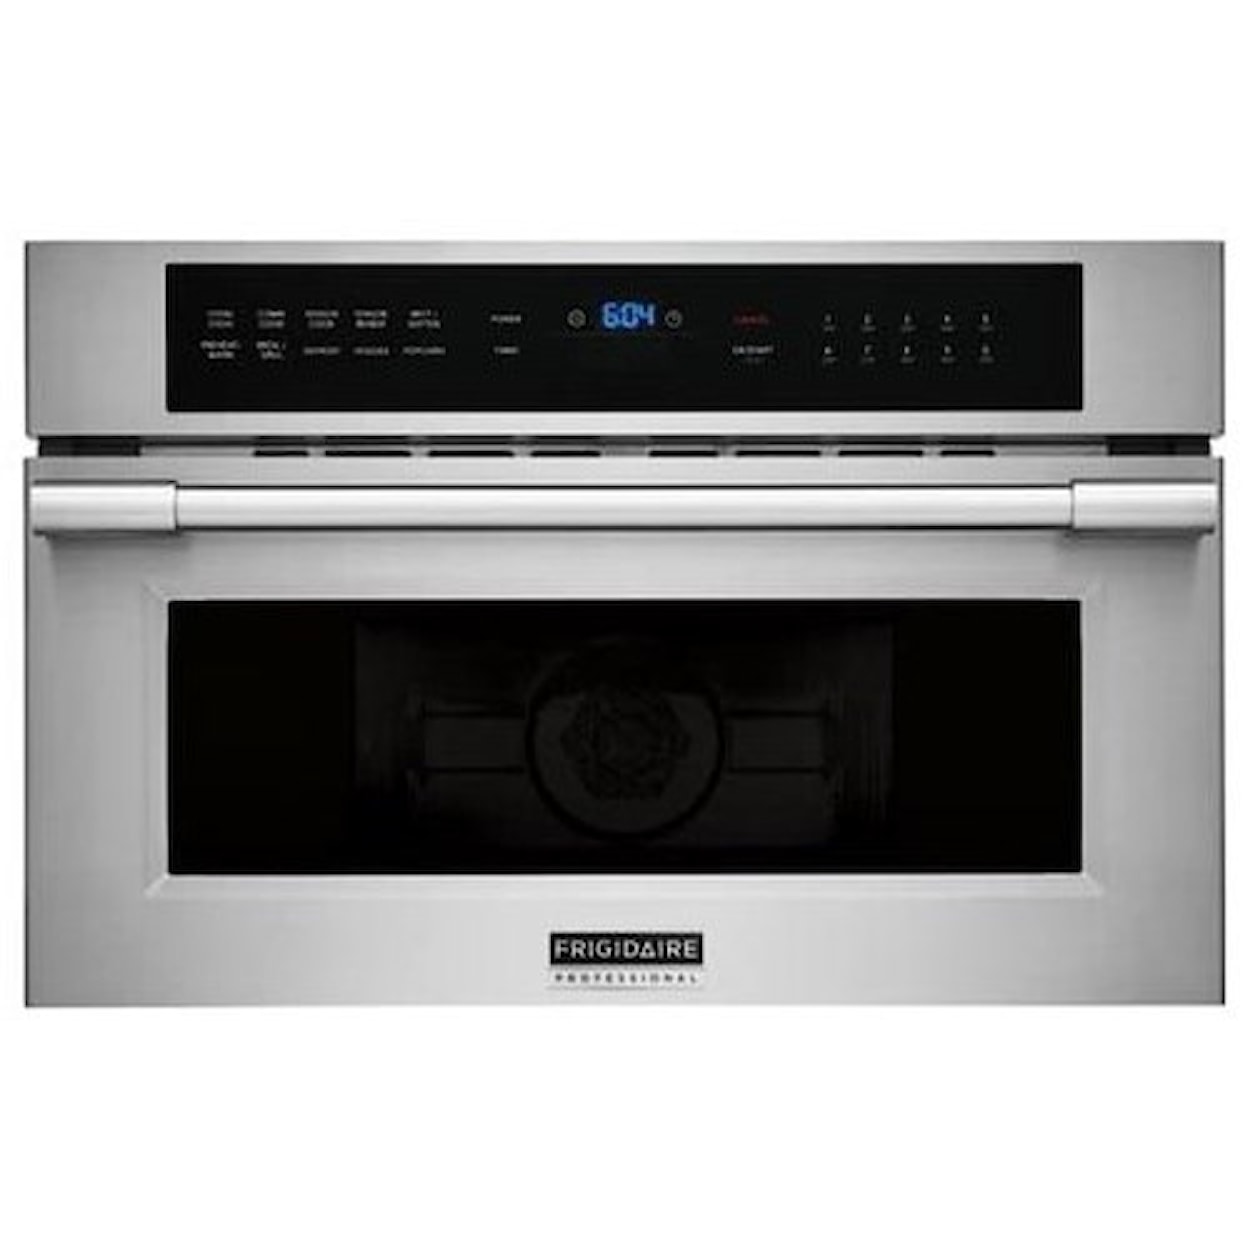 Frigidaire Microwaves 30" Built-In Convection Microwave Oven